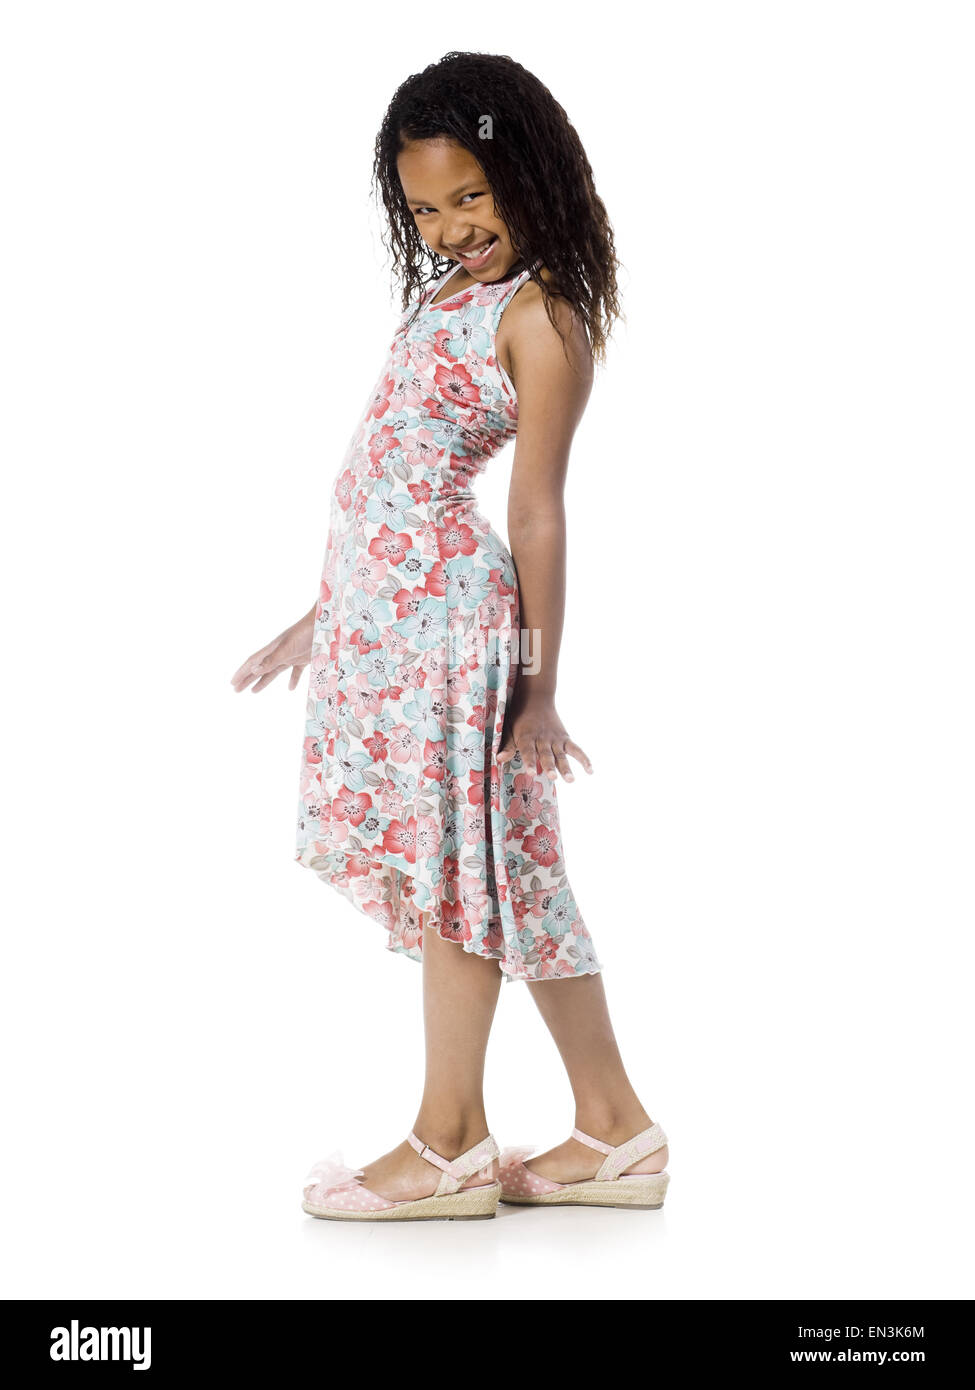 girl in a floral print dress Stock Photo